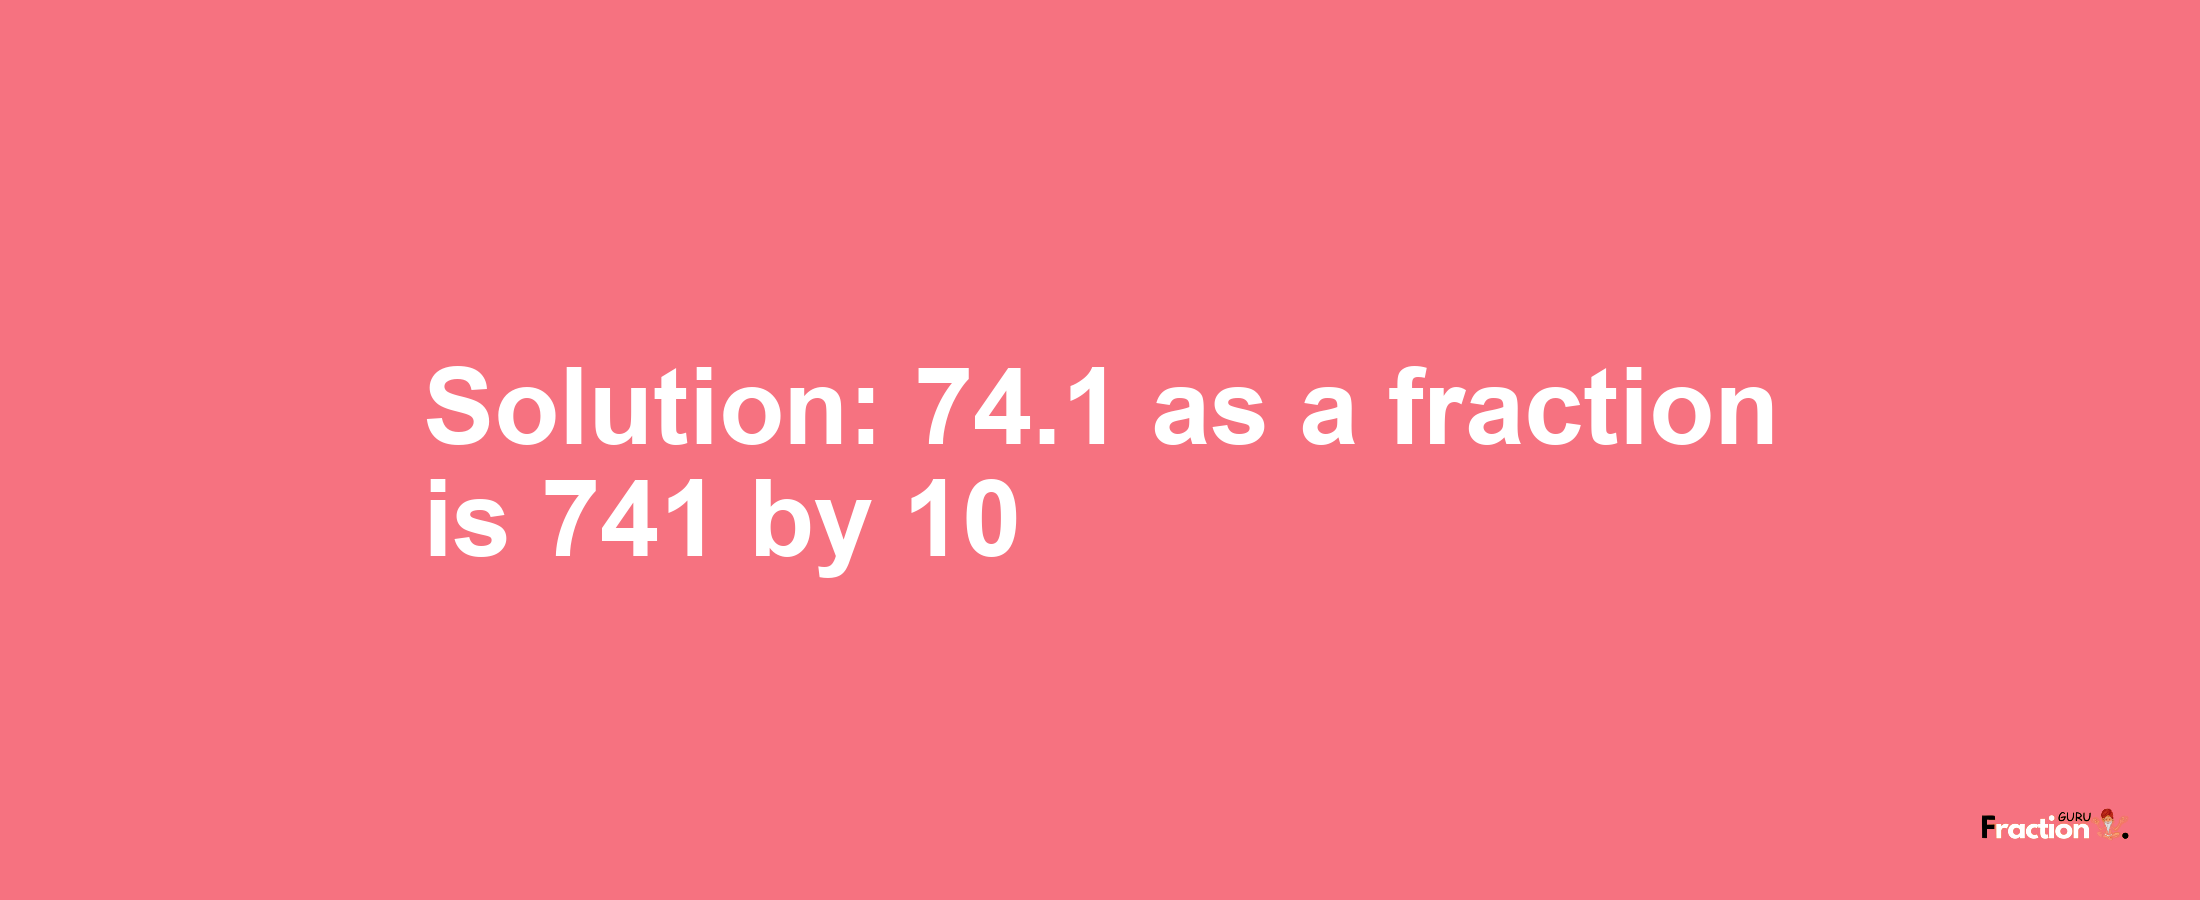 Solution:74.1 as a fraction is 741/10